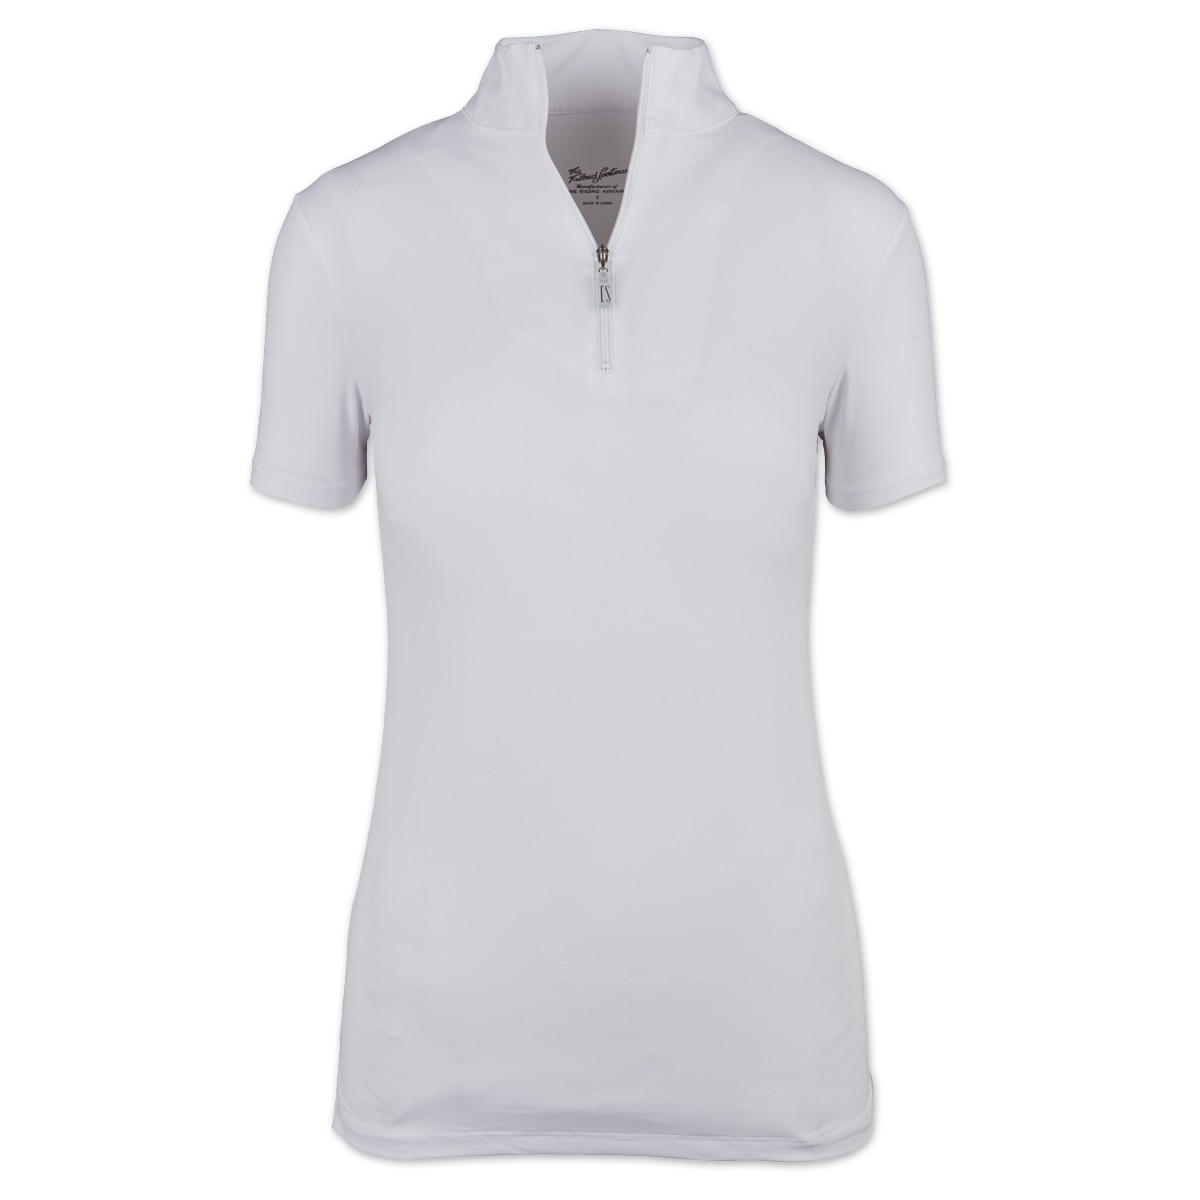 The Tailored Sportsman Ice Fil Short Sleeve